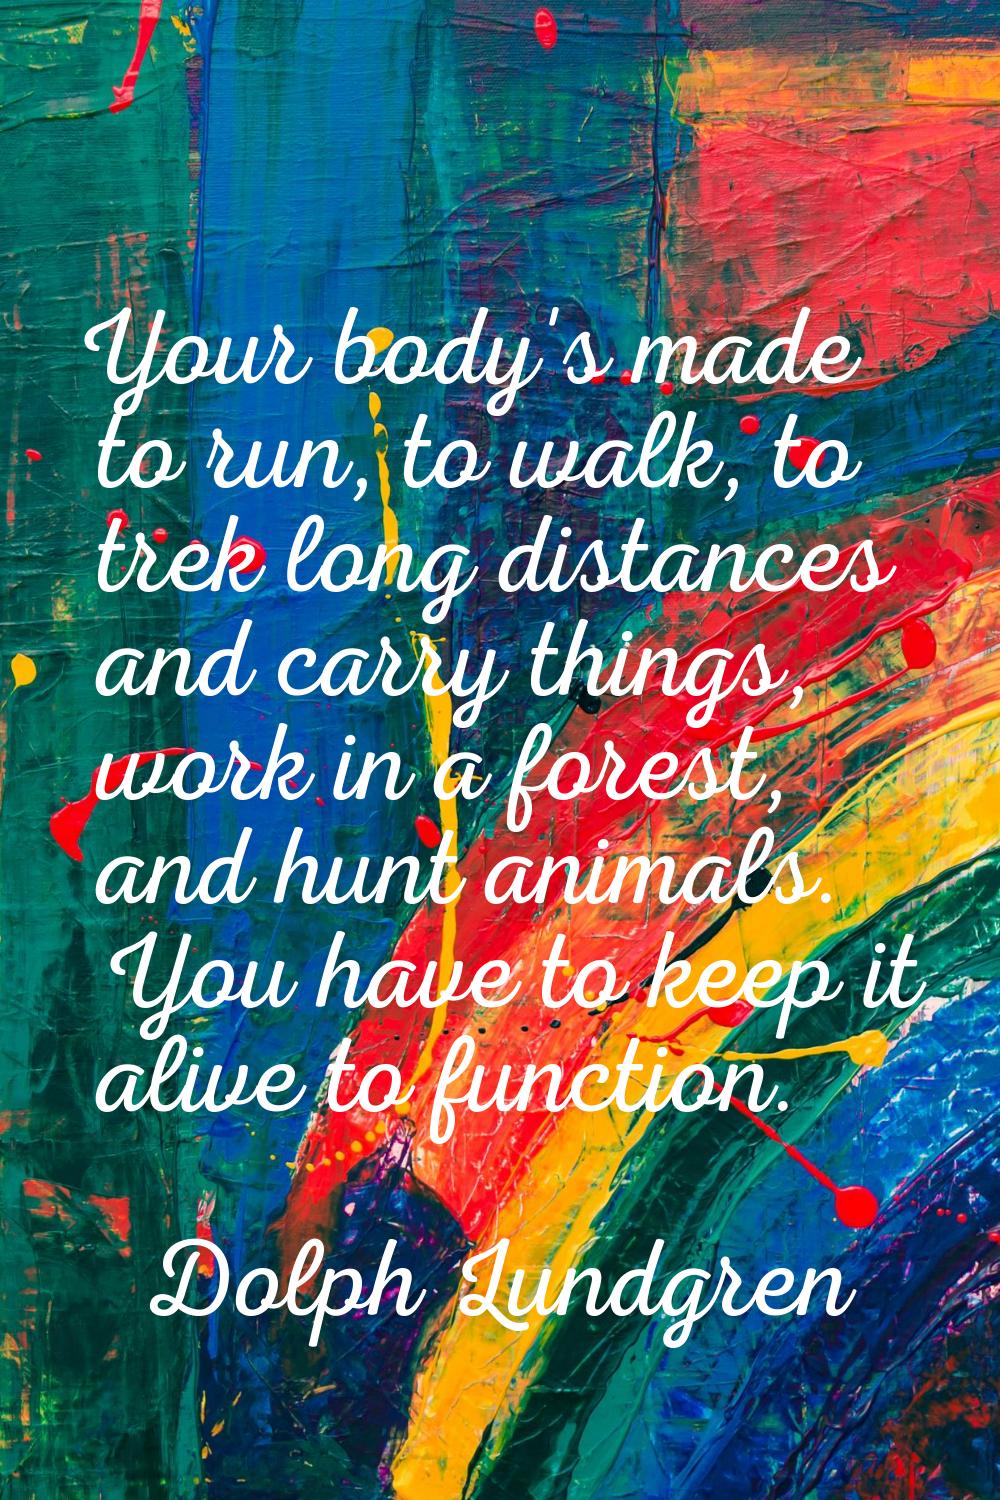 Your body's made to run, to walk, to trek long distances and carry things, work in a forest, and hu